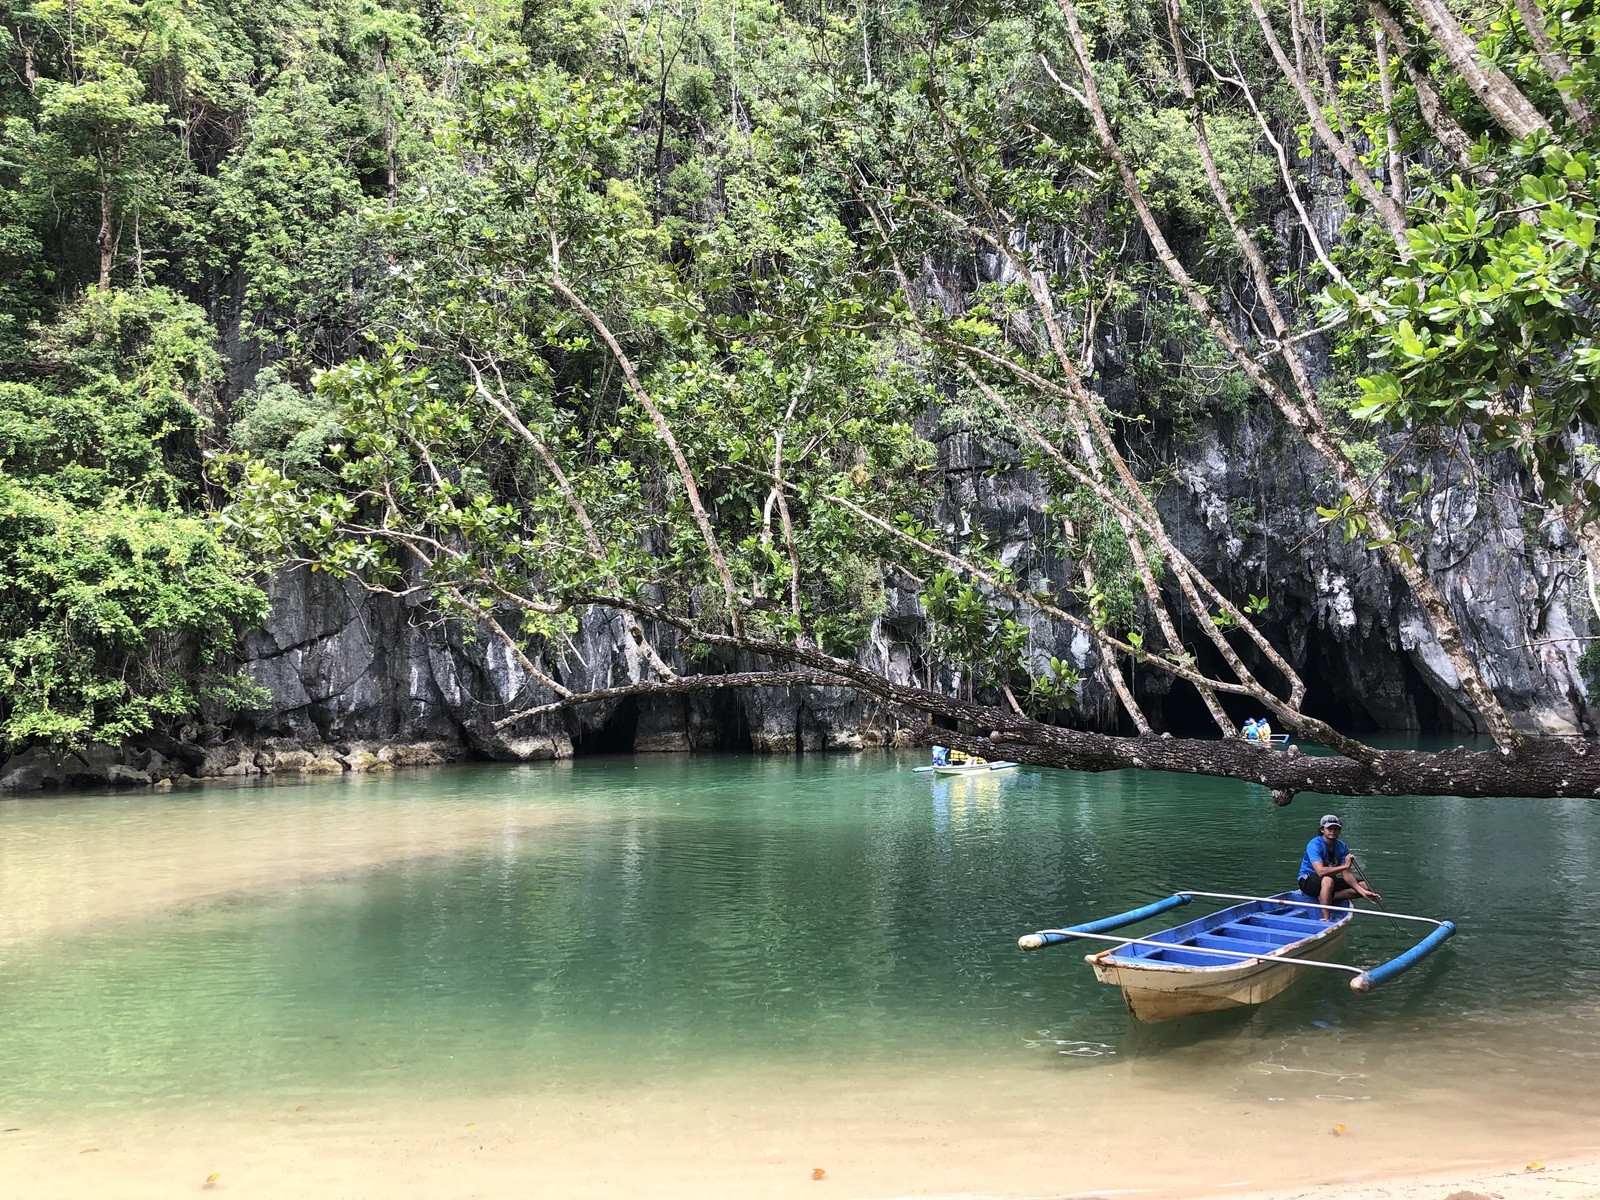 The entrance of the underground river cave.